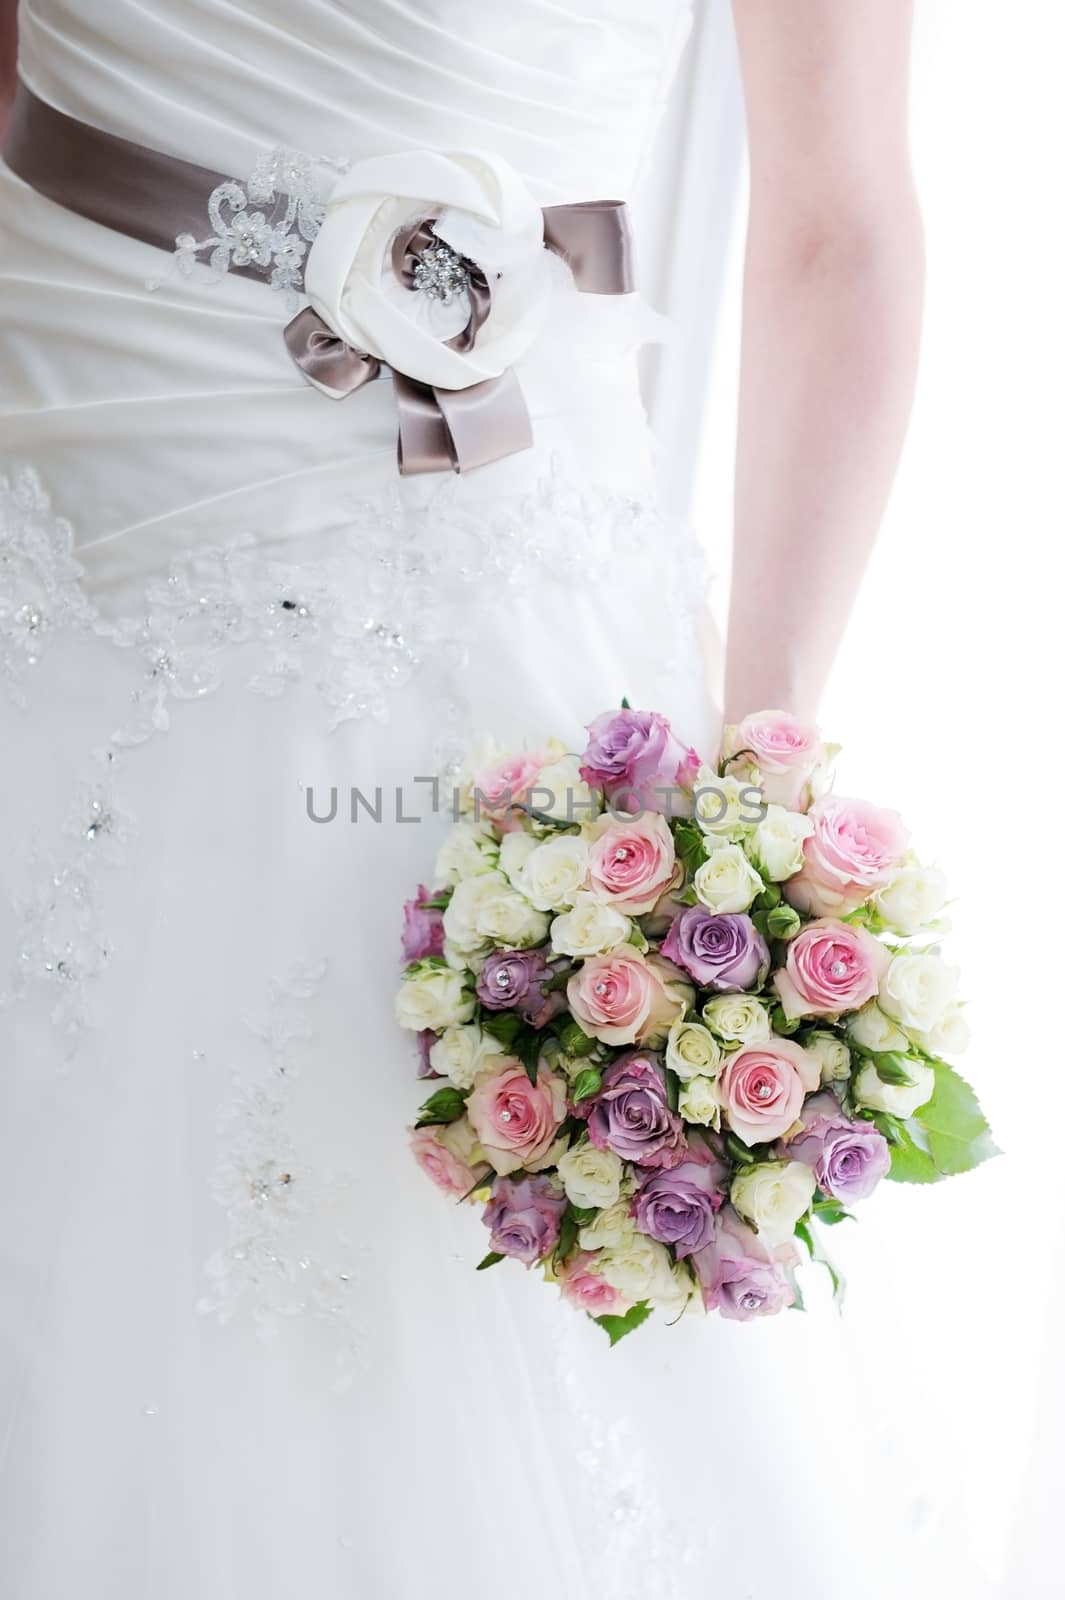 Brides flowers and dress detail  by kmwphotography